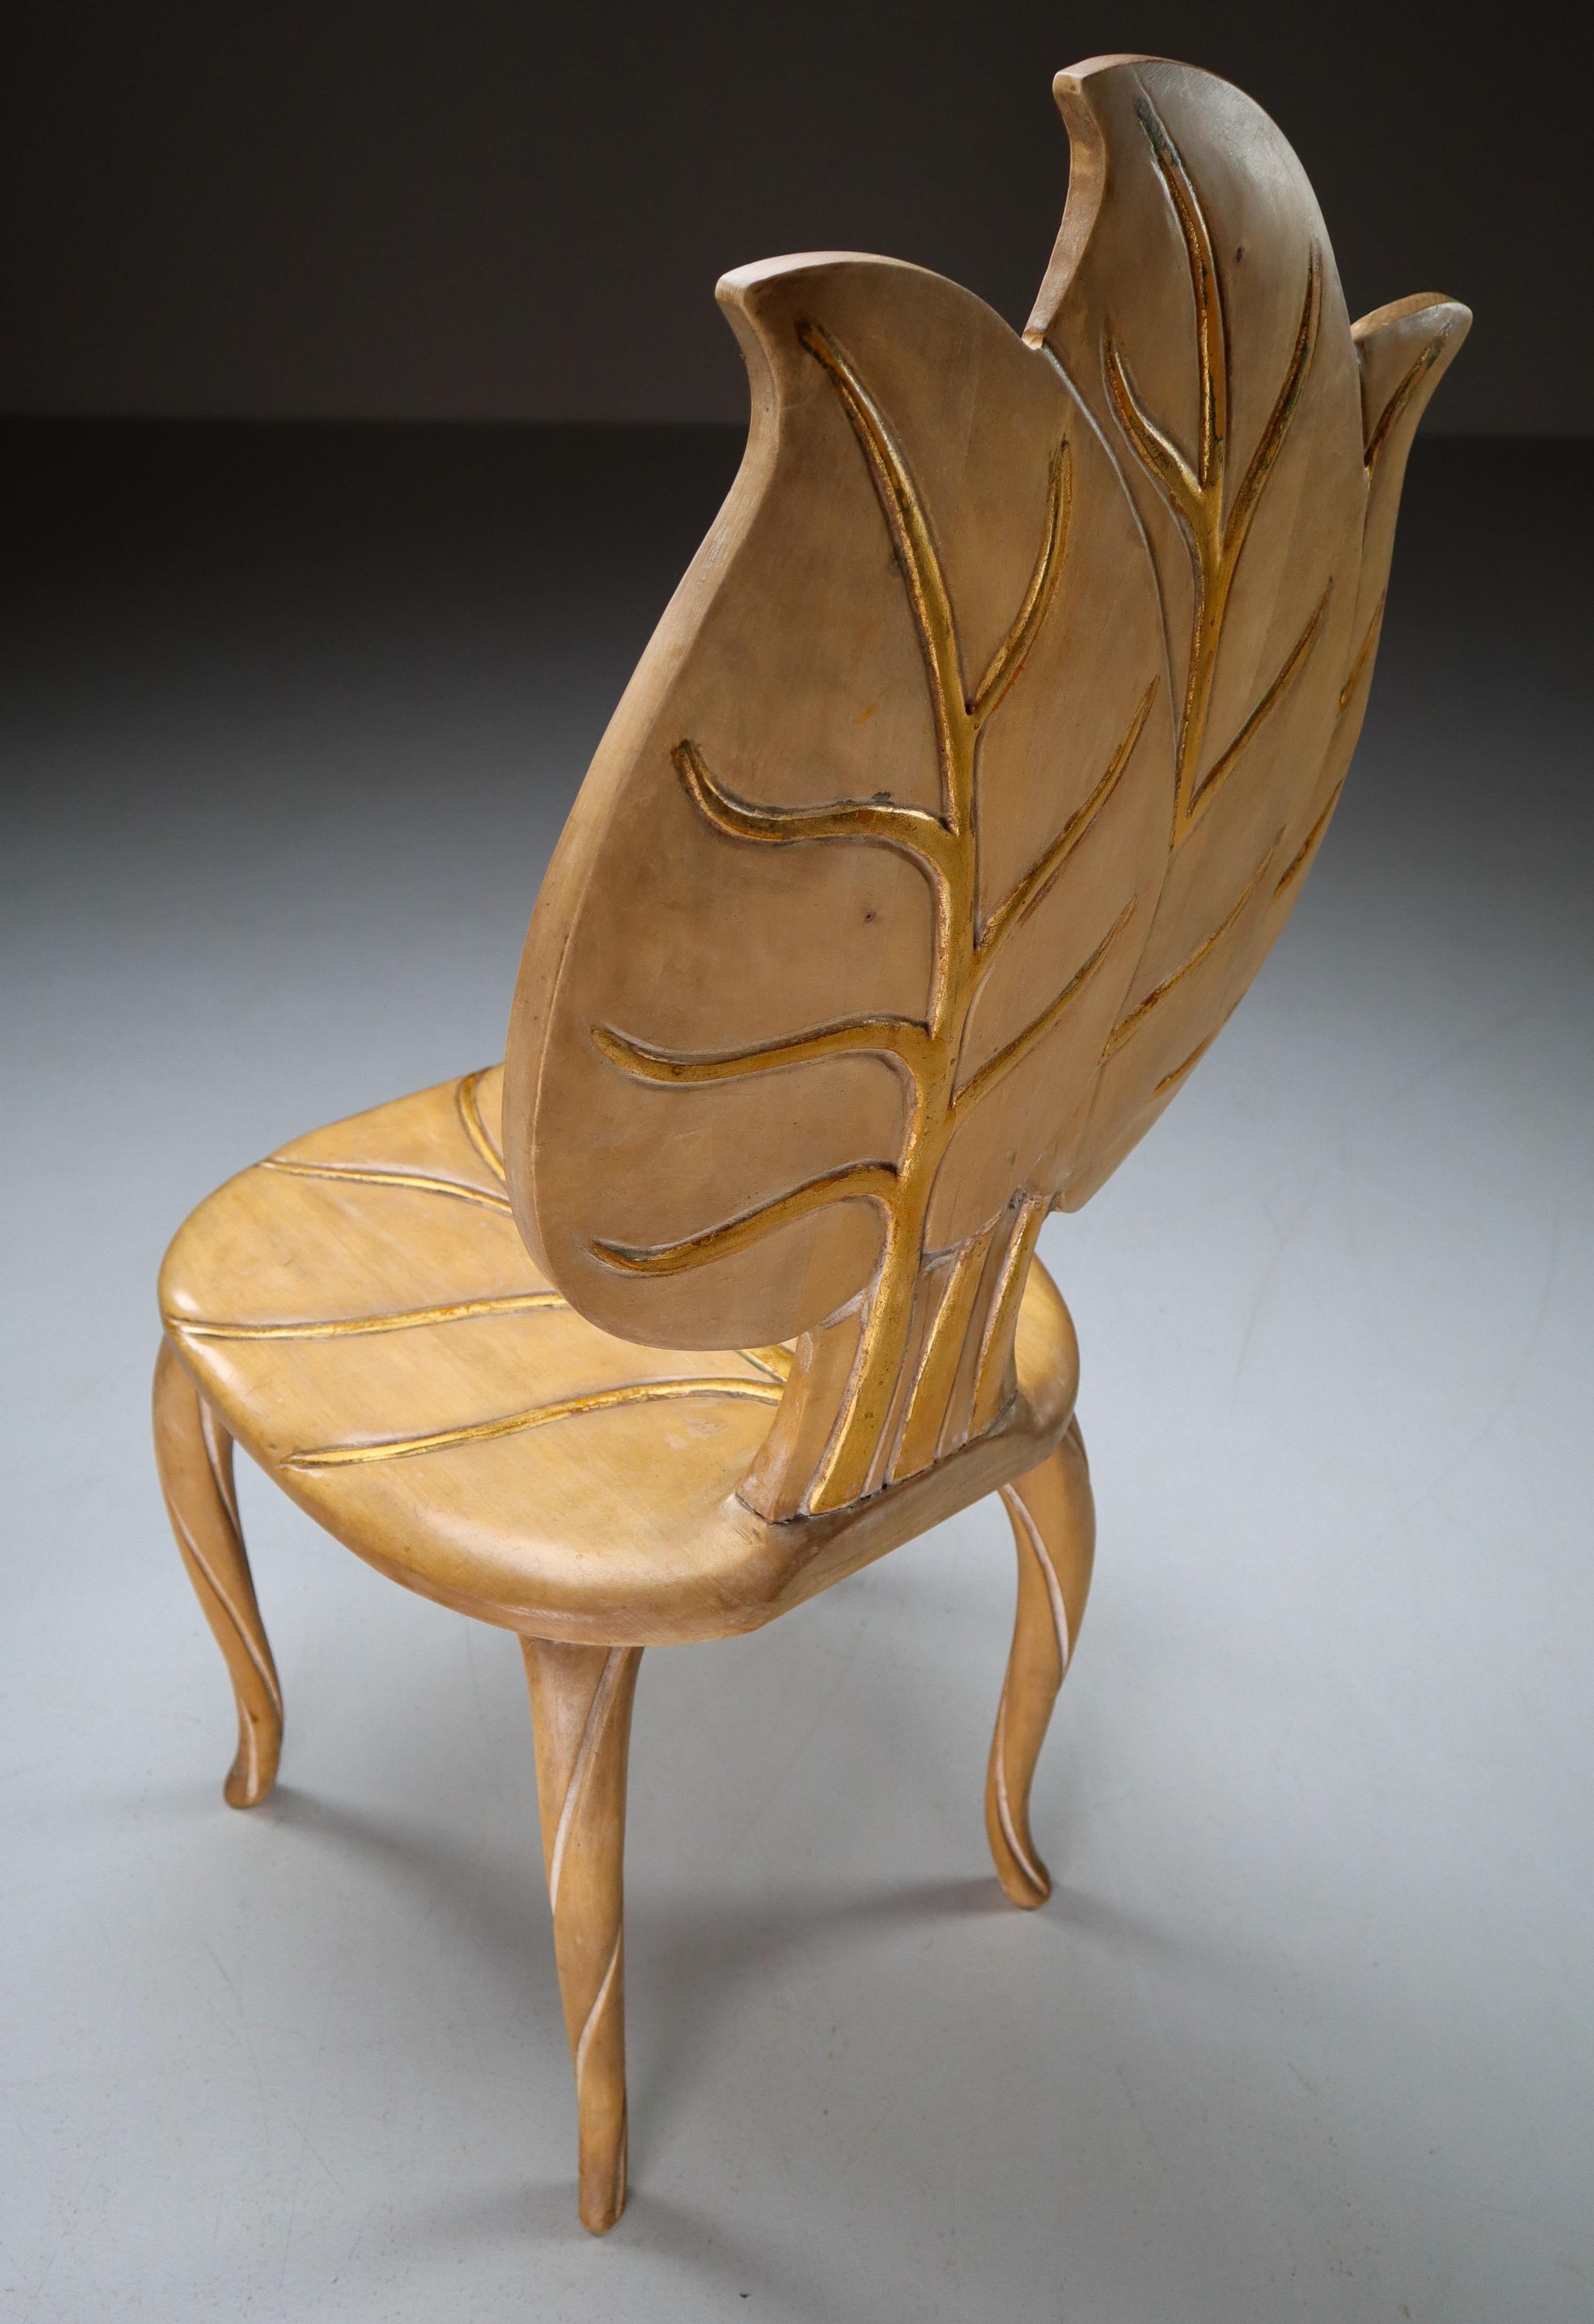 Bartolozzi & Maioli Wooden and Gold Leaf Chair, Italy, 1970s In Good Condition For Sale In Almelo, NL